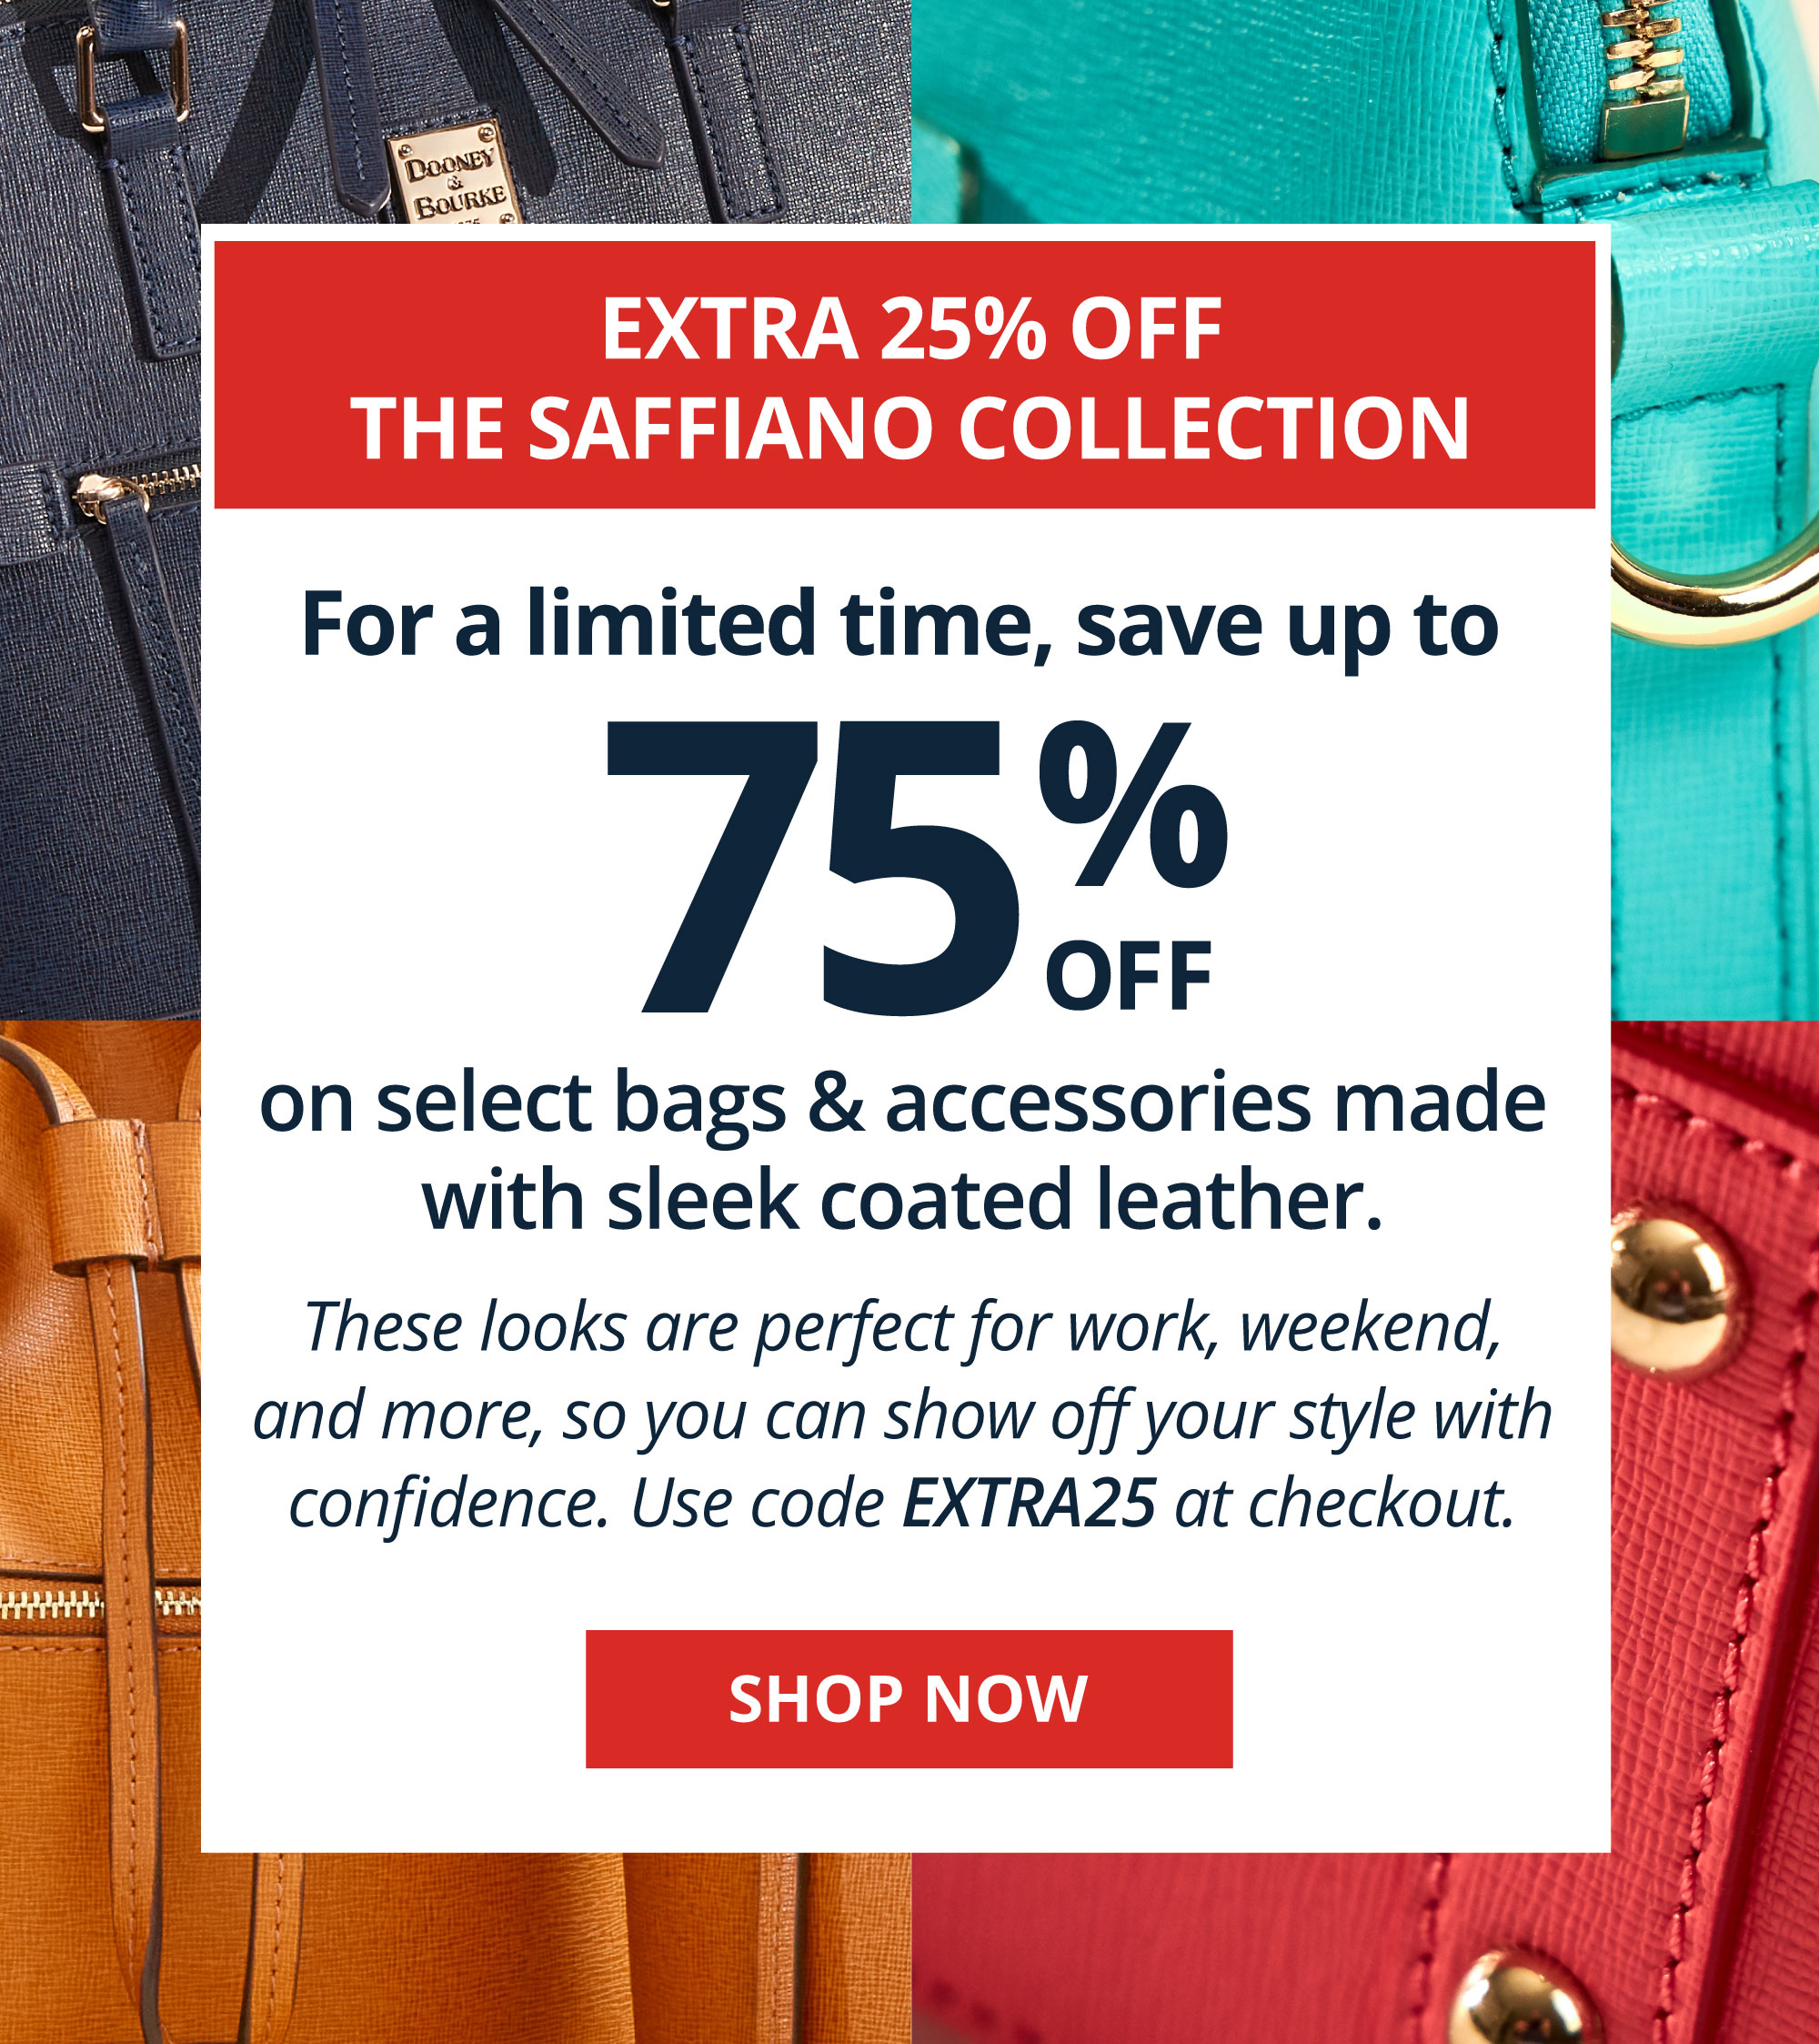  For a limited time, save up to % OFF on select bags accessories made S with sleek coated leather. These looks are perfect for work, weekend, and more, so you can show off your style with confidence. Use code EXTRA25 at checkout. 